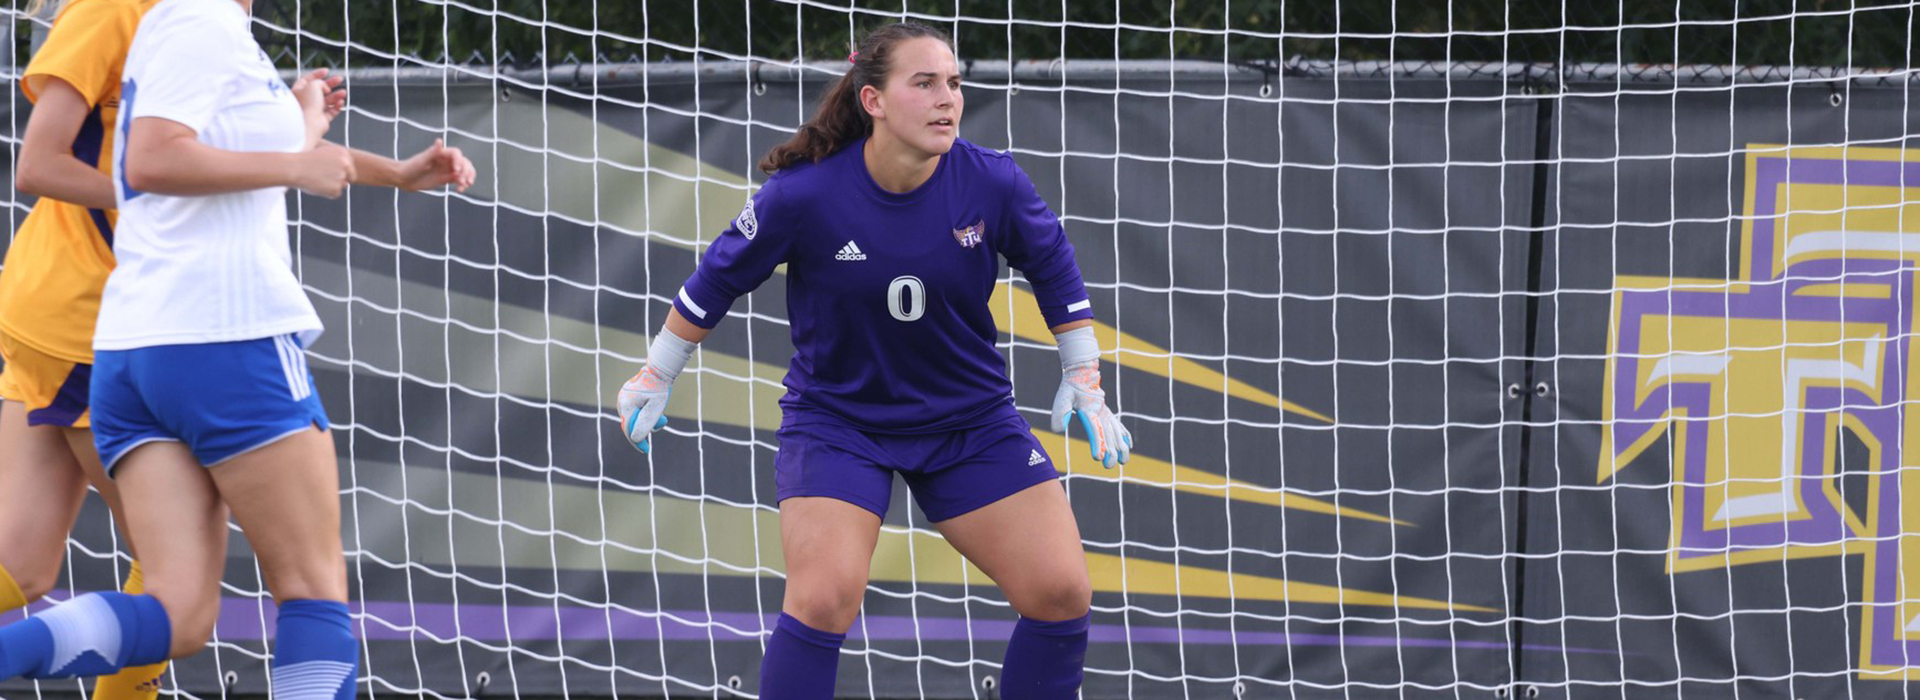 Tech soccer stays unbeaten in OVC play with scoreless draw at SIUE